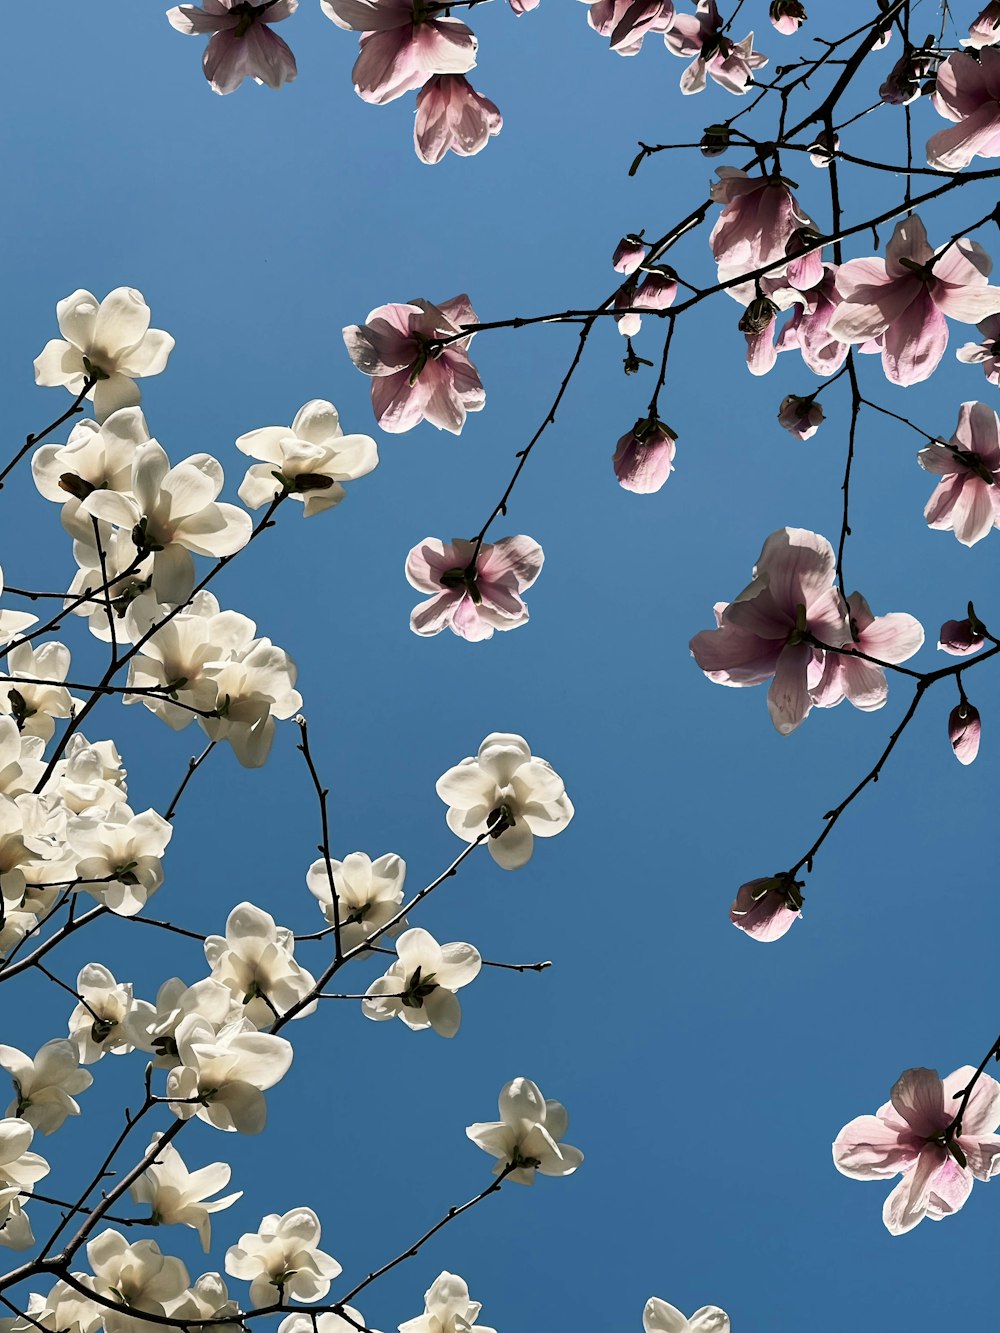 pink and white flowers against a blue sky